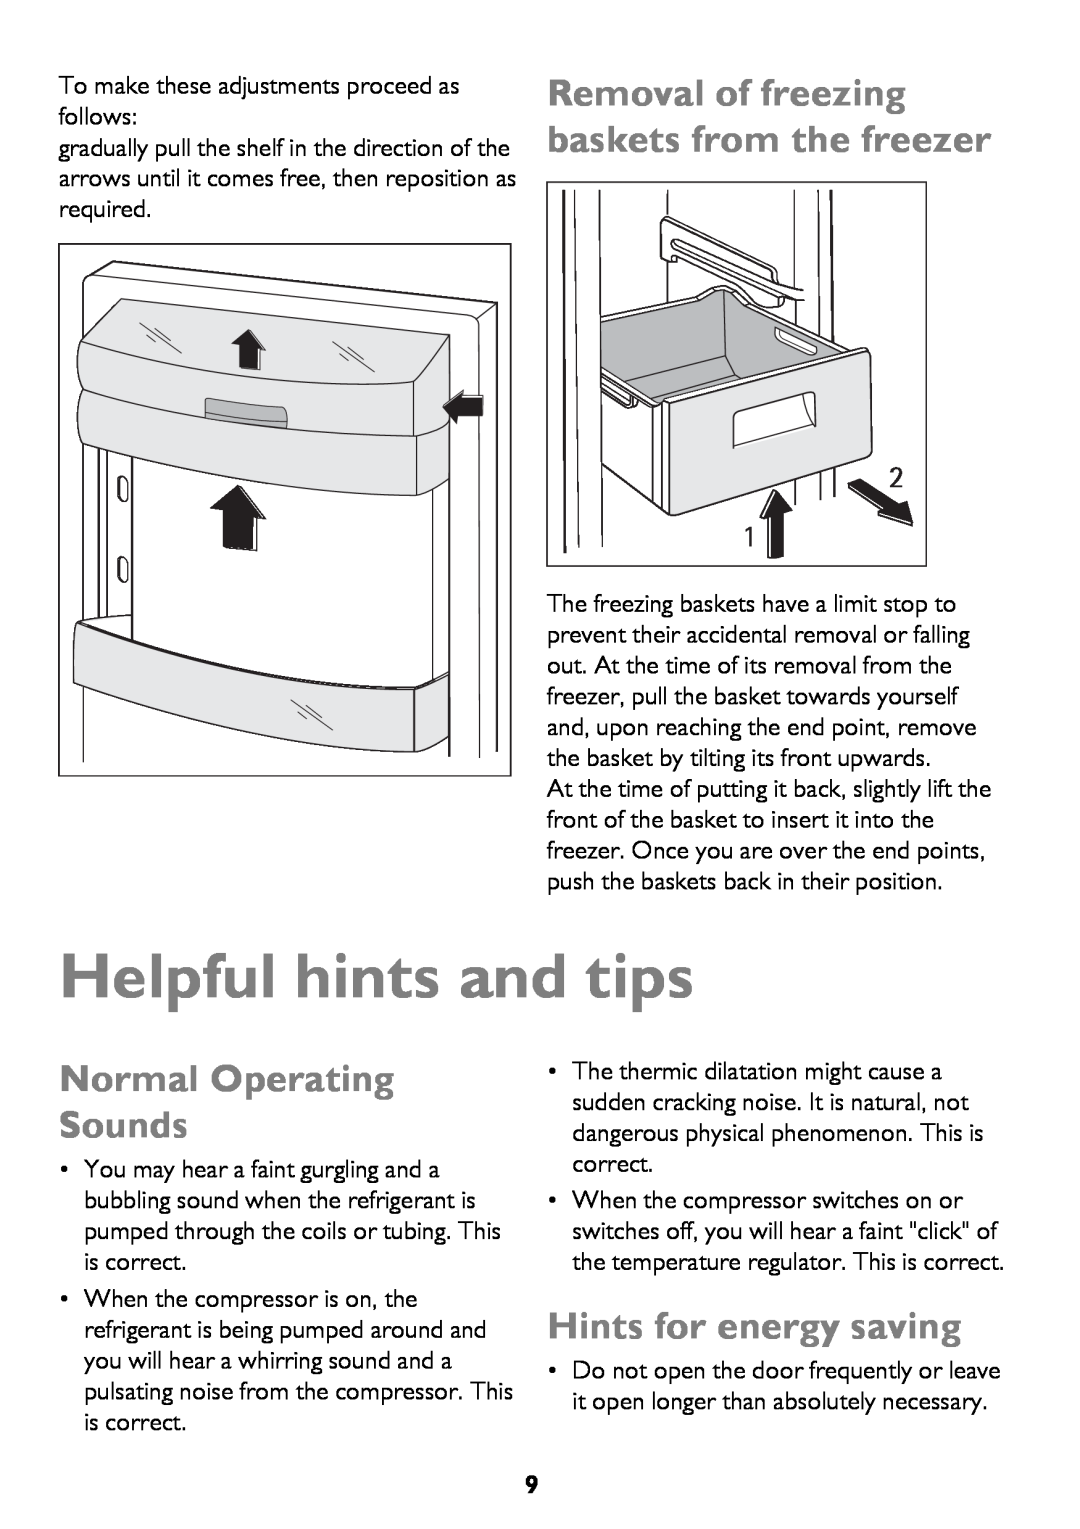 John Lewis JLFFW175 Helpful hints and tips, Removal of freezing baskets from the freezer, Normal Operating Sounds 